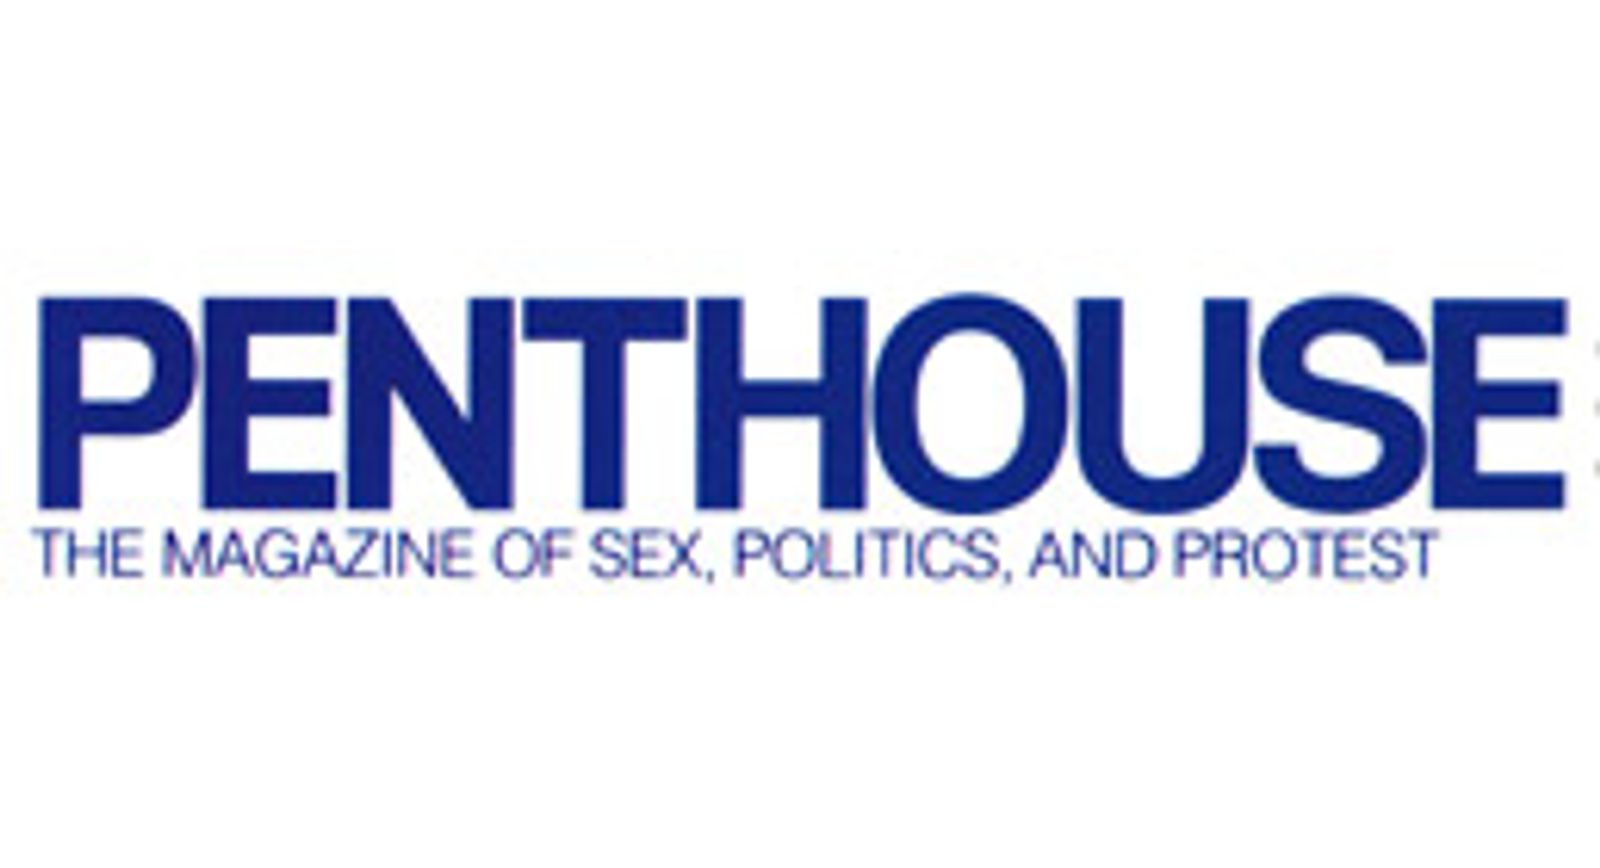 Penthouse Publisher Files Chapter 11